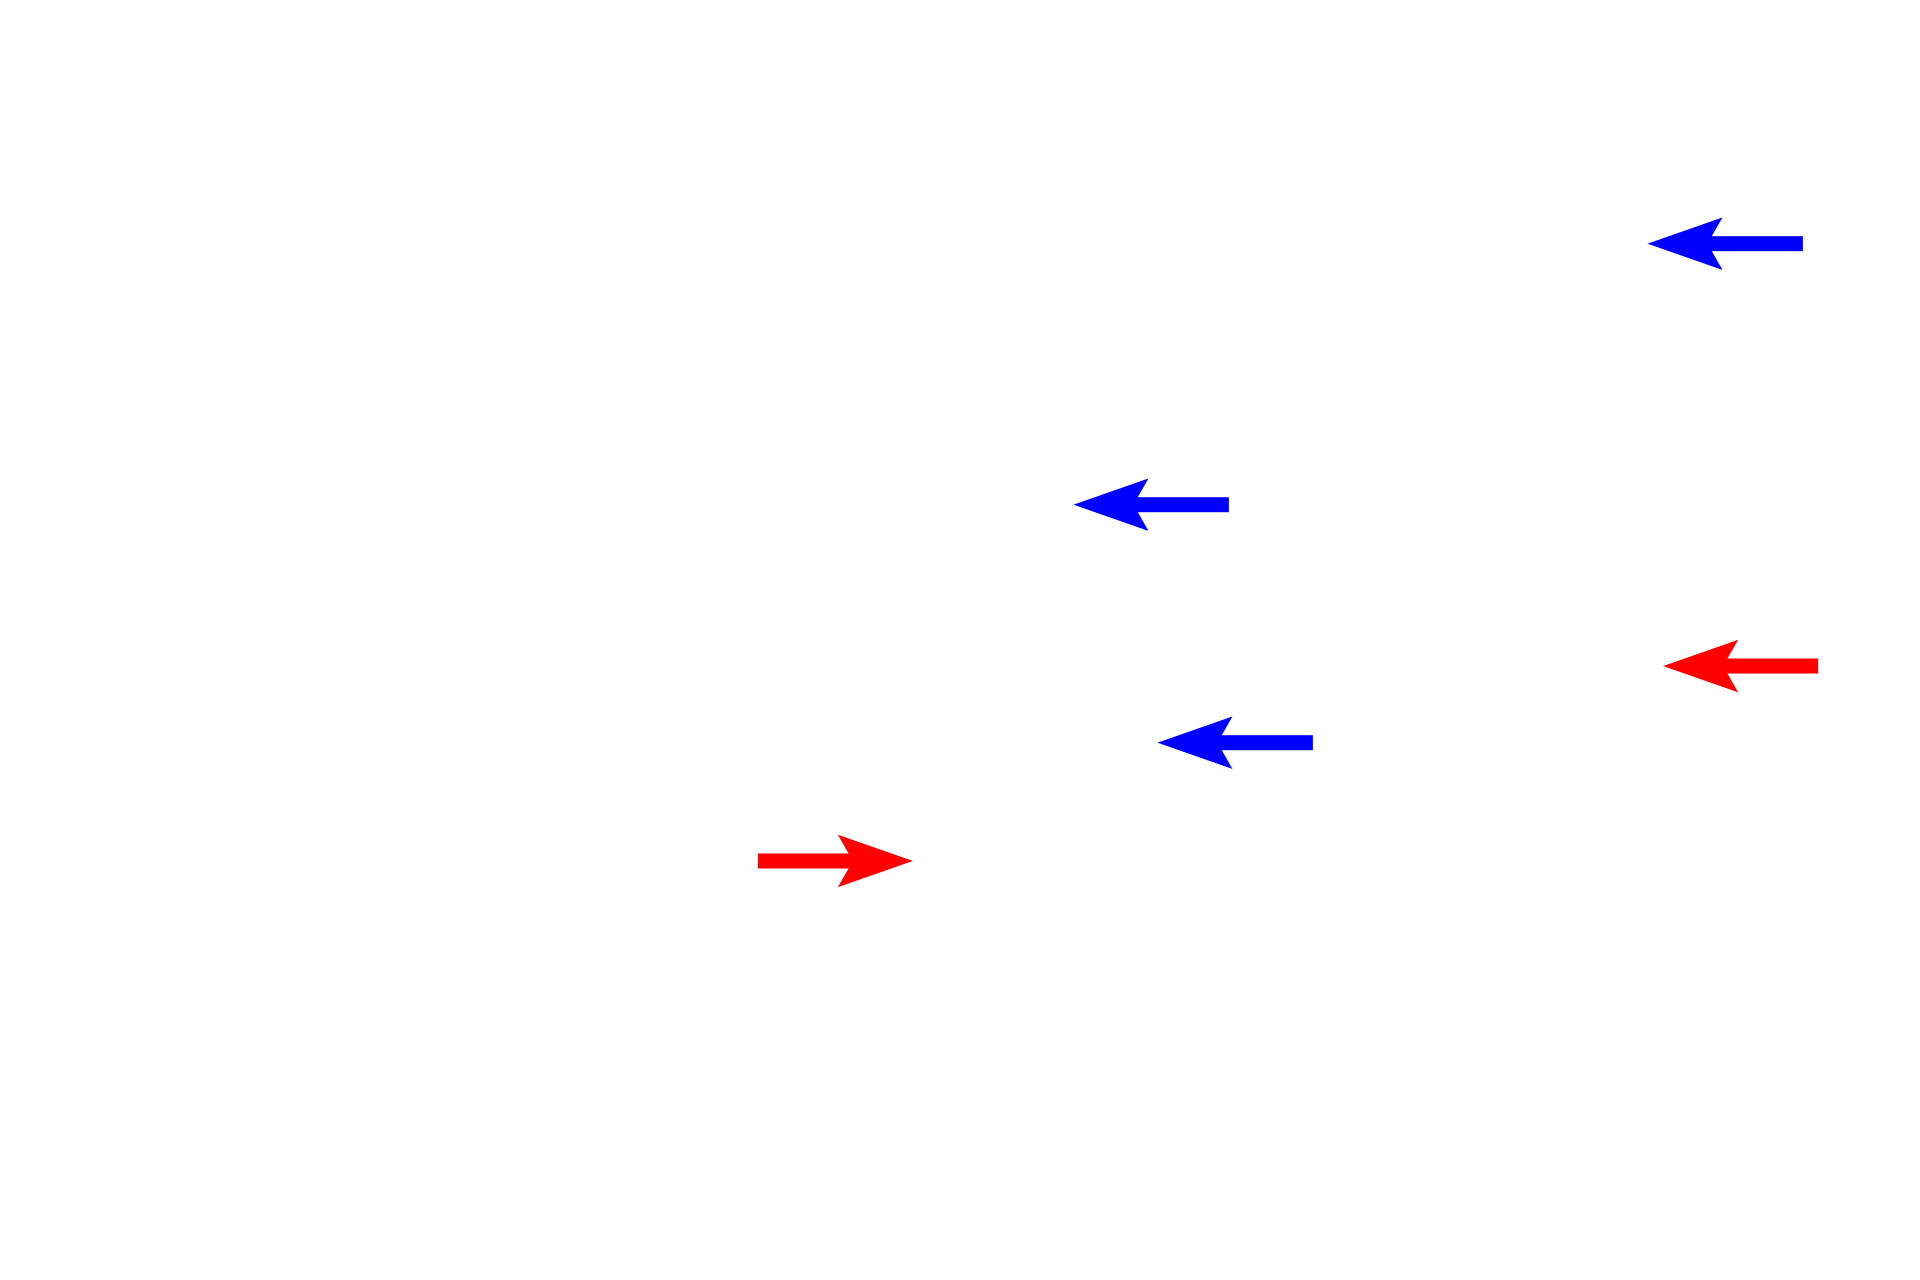 Discontinuous capillary > <p>Discontinuous capillaries, or sinusoids, have wider diameters and more irregular outlines than other capillary types. These capillaries have large gaps (blue arrows) between individual endothelial cells as well as fenestrations (red arrows) without diaphragms. Discontinuous capillaries are found in the liver, spleen and bone marrow, where greater transport across the endothelium is required.</p>
